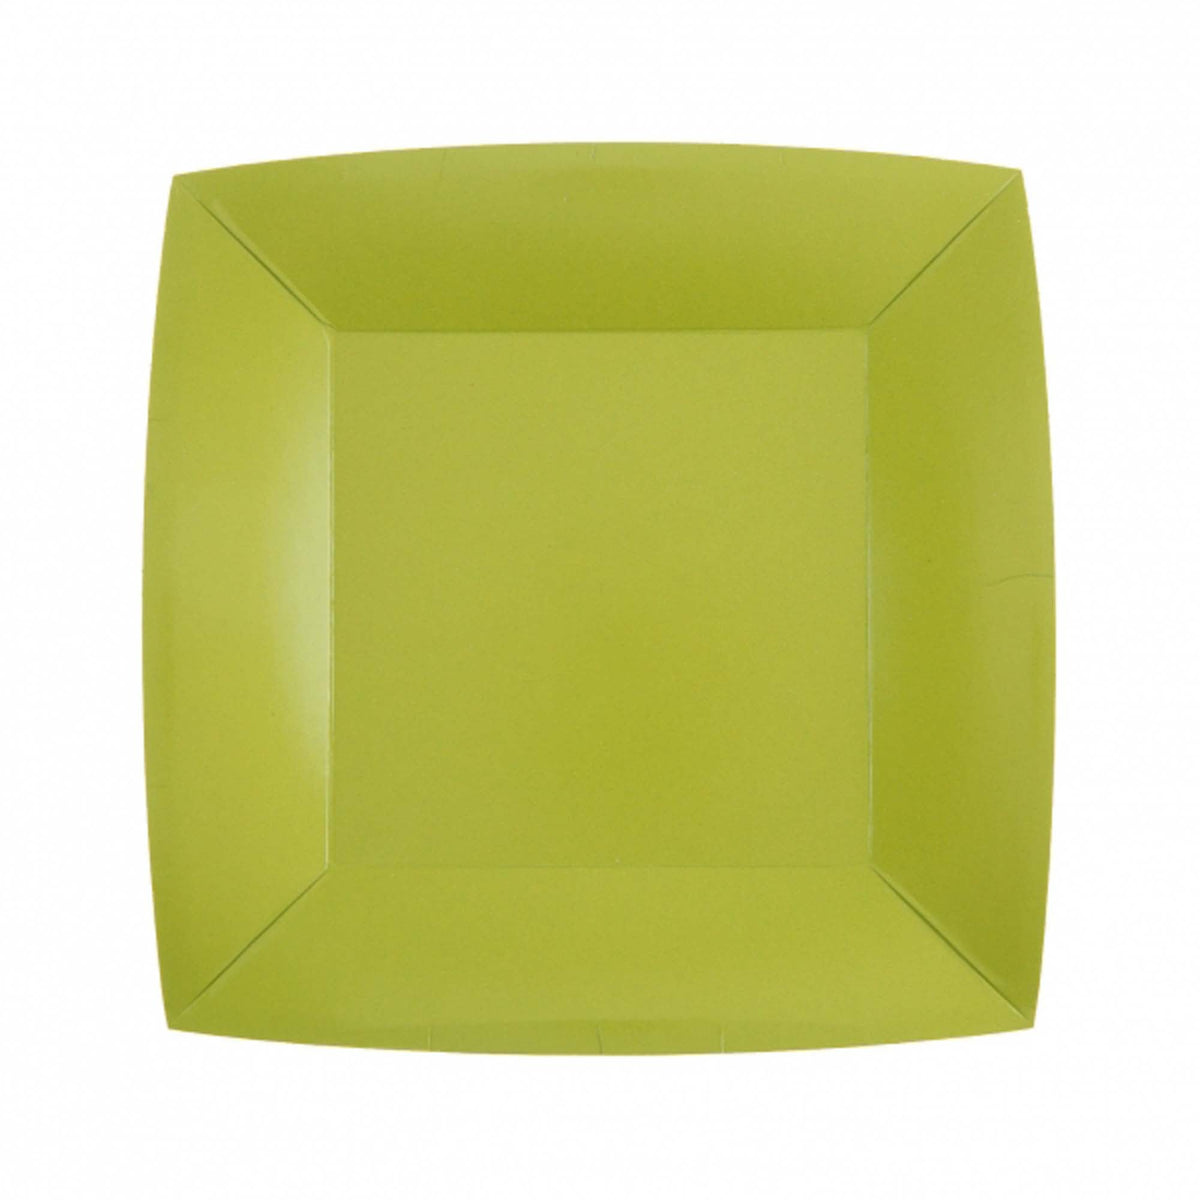 SANTEX Everyday Entertaining Kiwi Green Small Square Dessert Party Paper Plates, 7 Inches, 10 Count 3660380071990